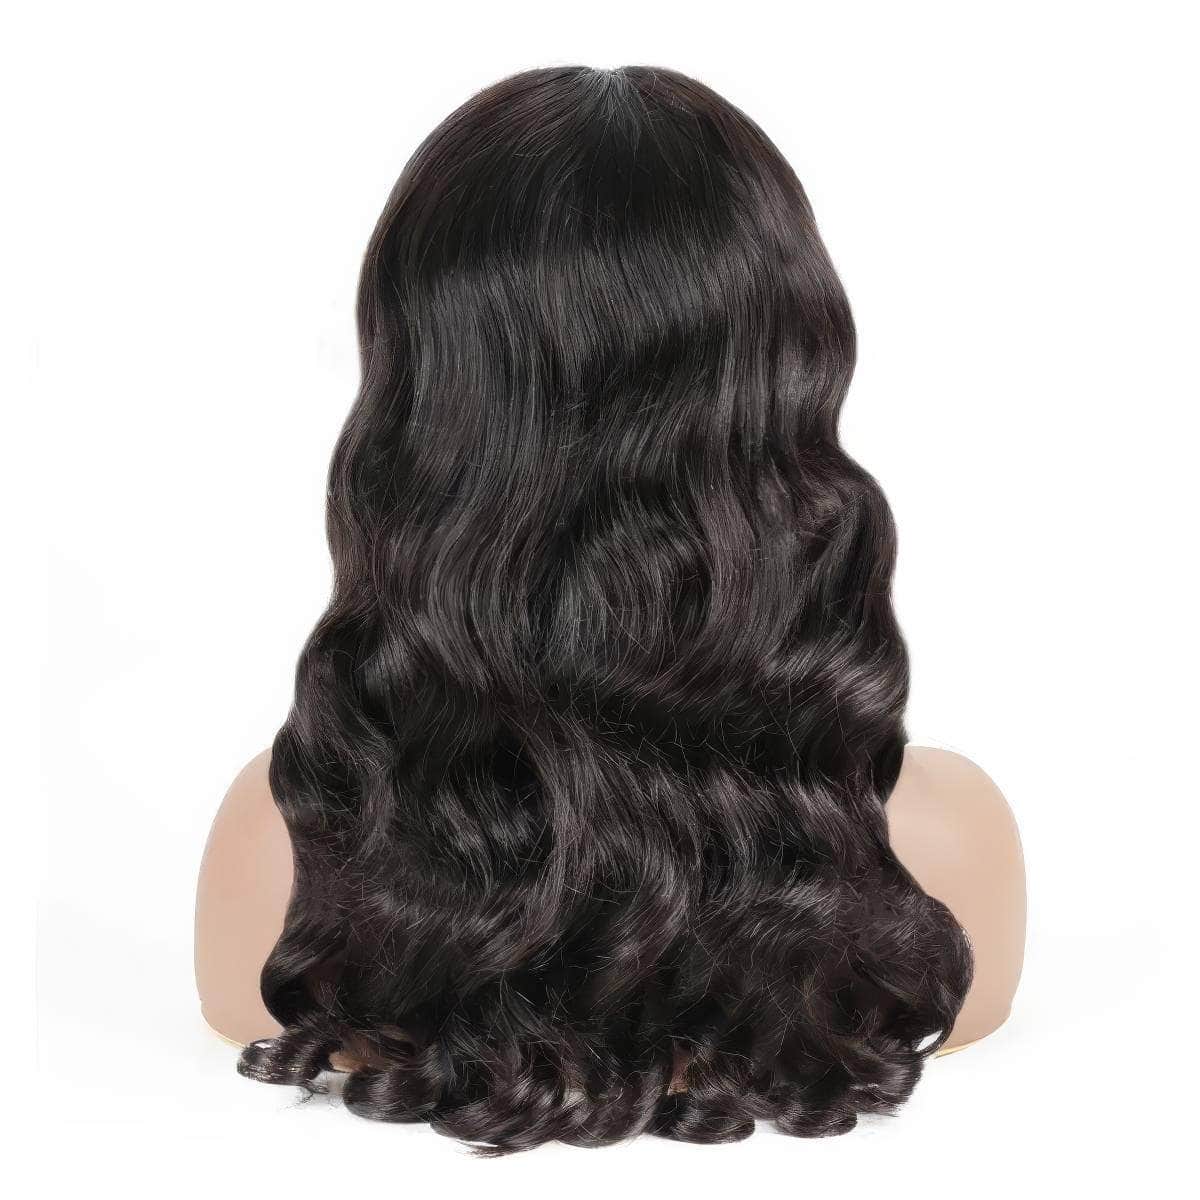 Brazilian Ocean Wave Glueless Wig - Wear And Go, 6x4 HD Lace, Glueless Human Hair Wig, Ready To Wear, Pre-Plucked, New In Body Wave